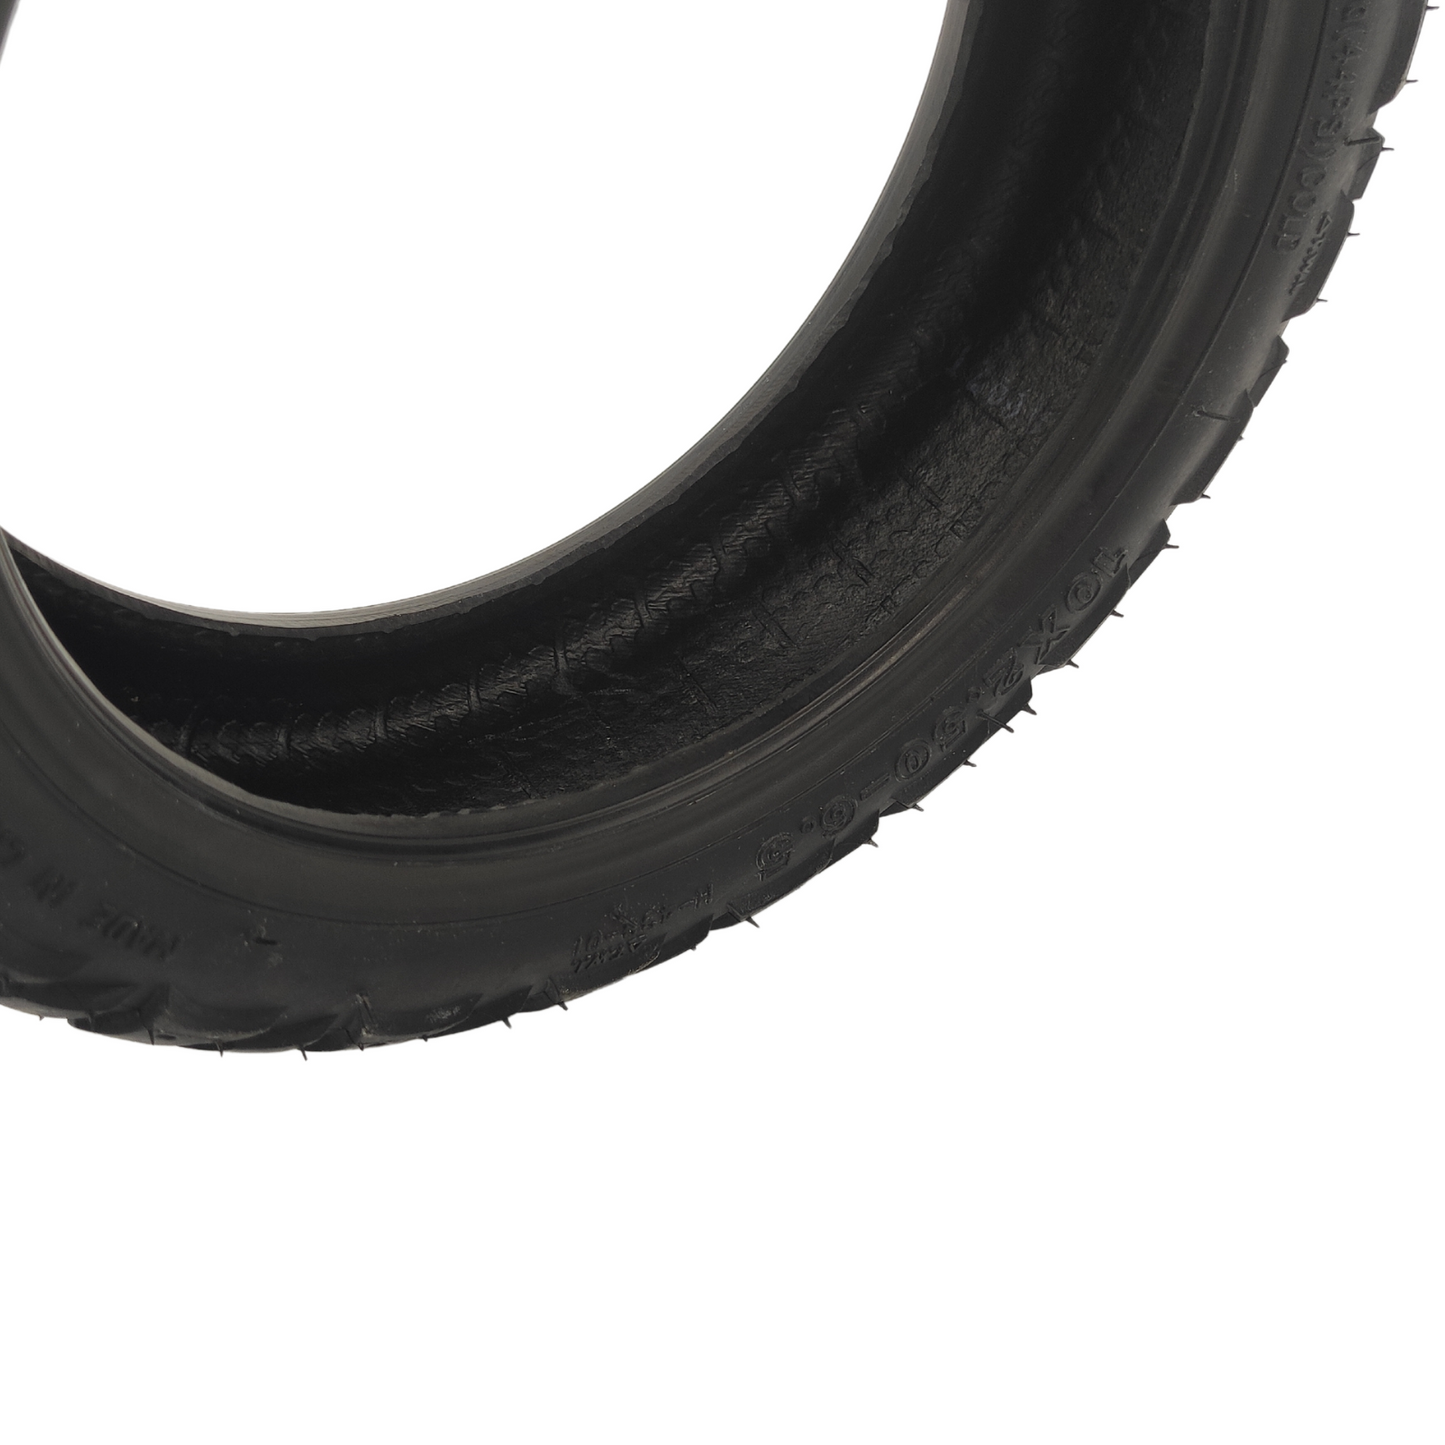 Jeep 2Xe Adventurer off-road tire tubeless 10x2.5-6.5 inch with valve aftermarket